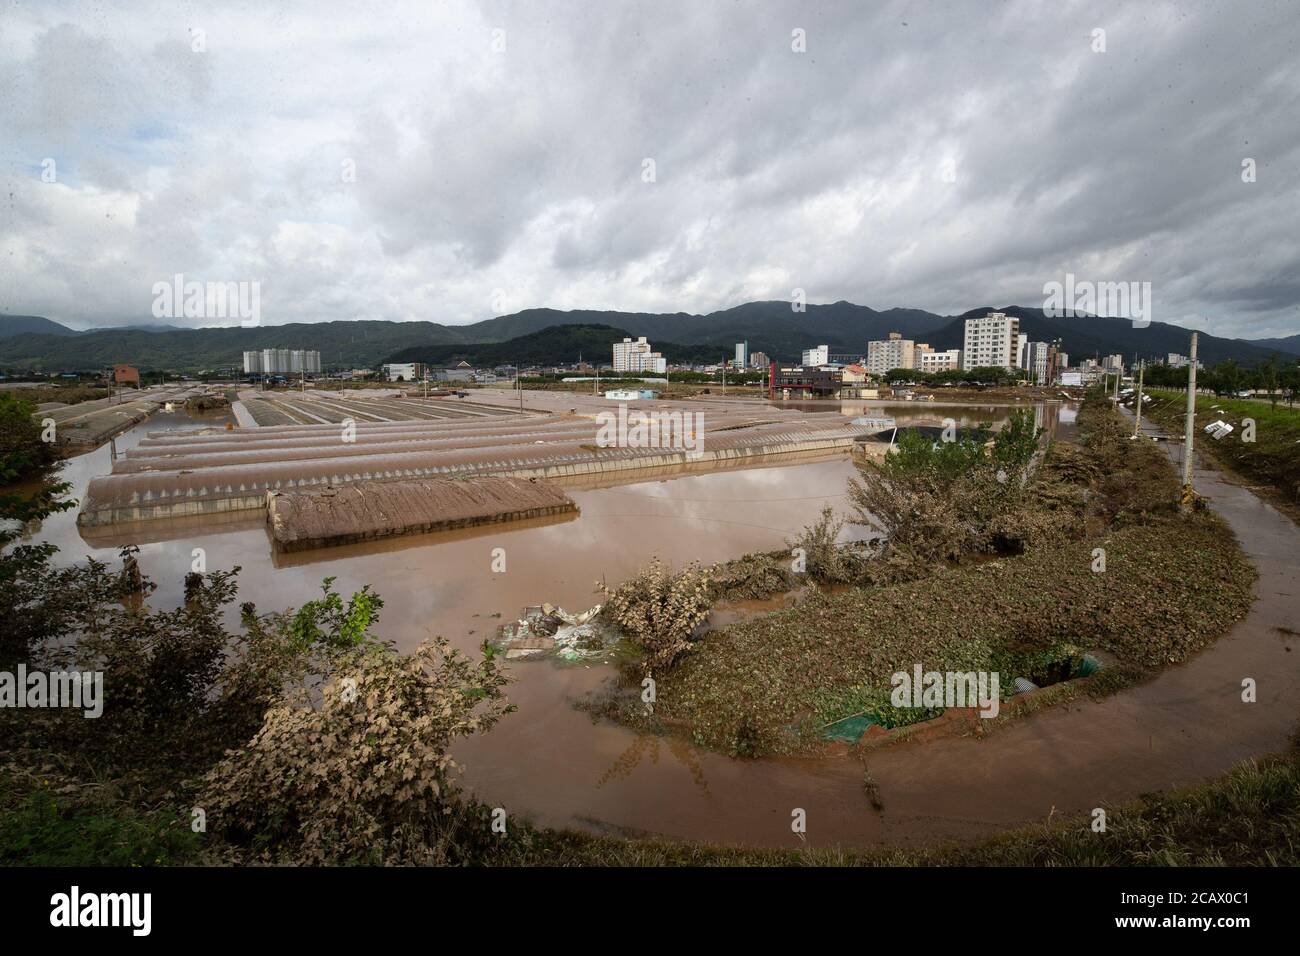 Gurye County. 9th Aug, 2020. Photo take on Aug. 9, 2020 shows a flooded farmland in Gurye county, South Jeolla province of South Korea. South Korea's death toll from heavy rain, which continued over the past seven days, rose to 30, with 12 missing and eight wounded as of 10:30 a.m. local time Sunday, according to the Central Disaster and Safety Countermeasure Headquarters. Credit: Lee Sang-ho/Xinhua/Alamy Live News Stock Photo